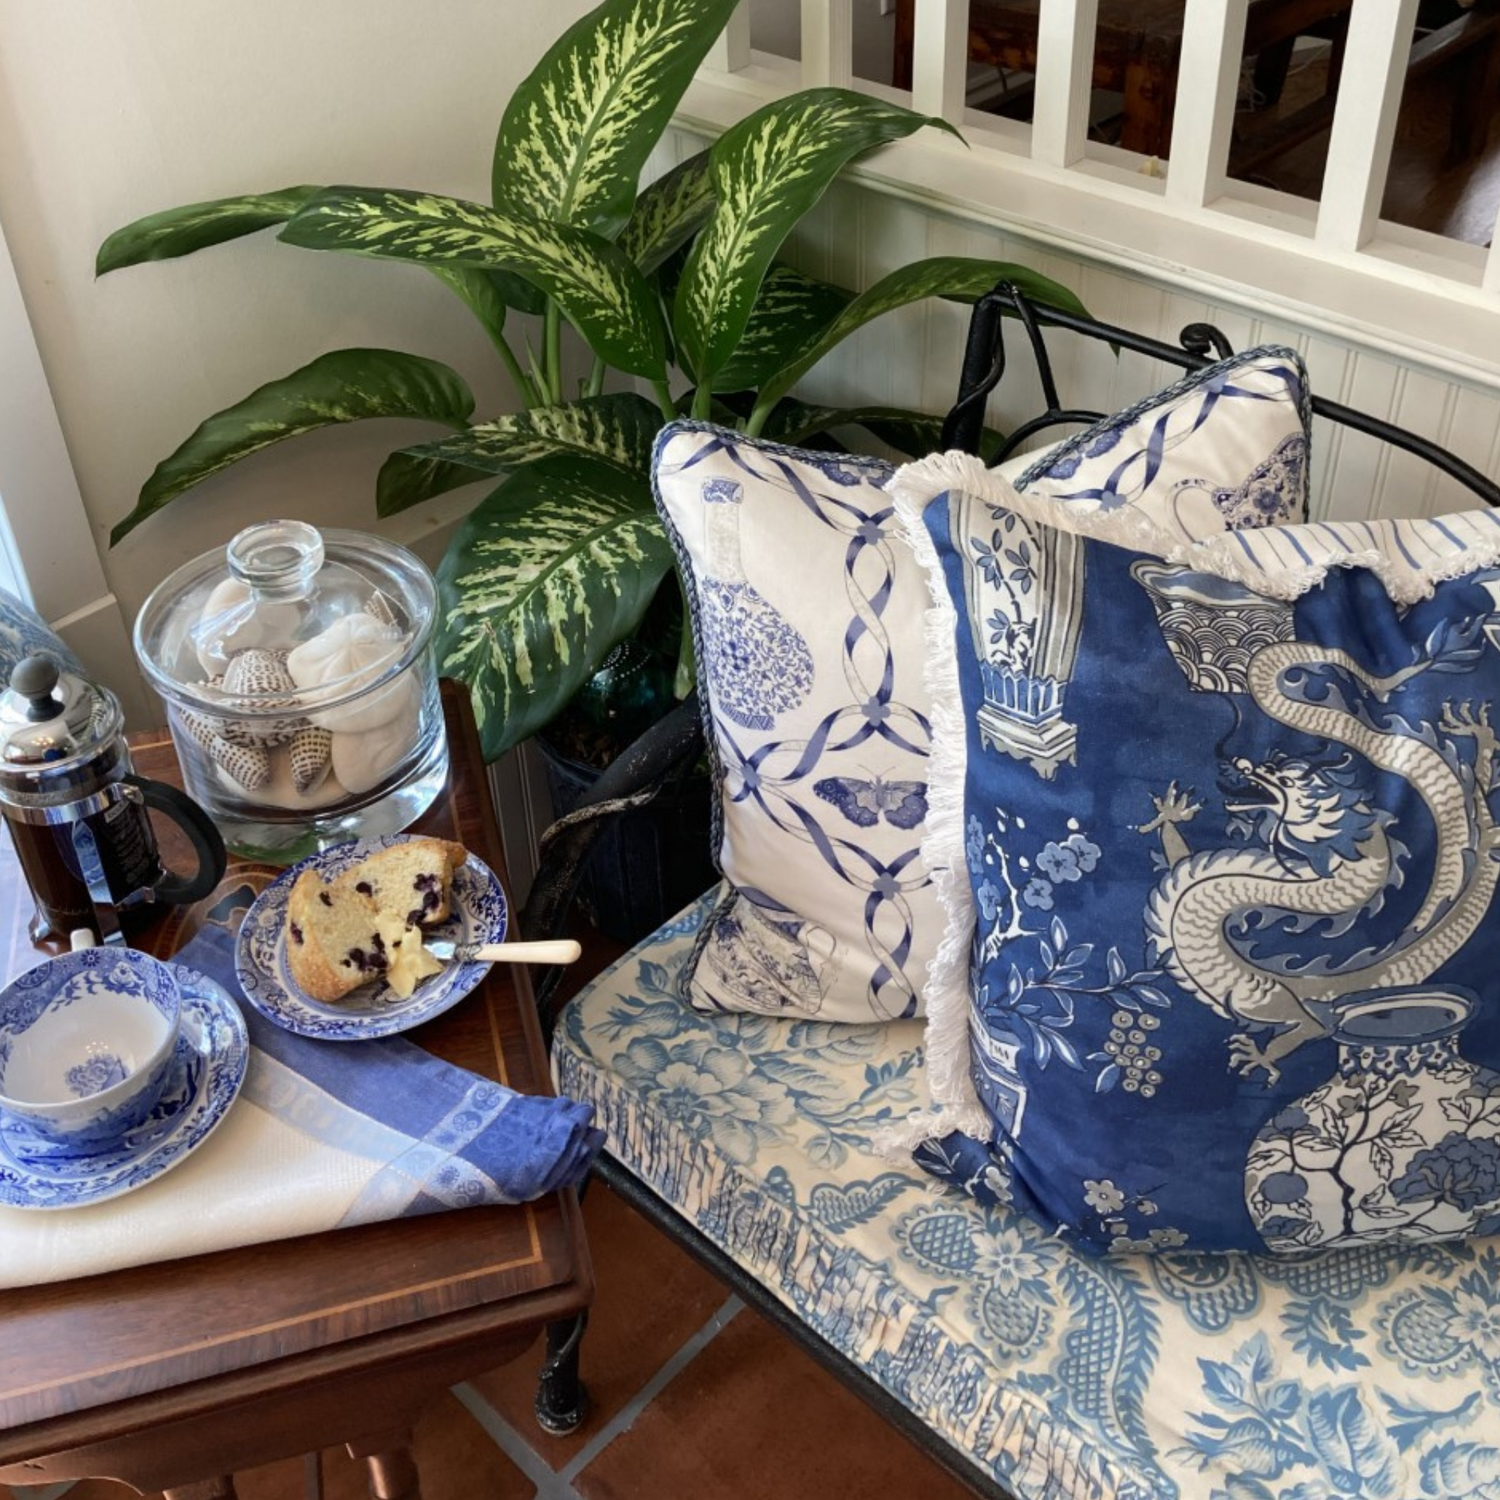 Chinoiserie Blue Ming Dynasty Jars and Dragons 21 X 21 Square Designer Pillow with Down Feather Insert